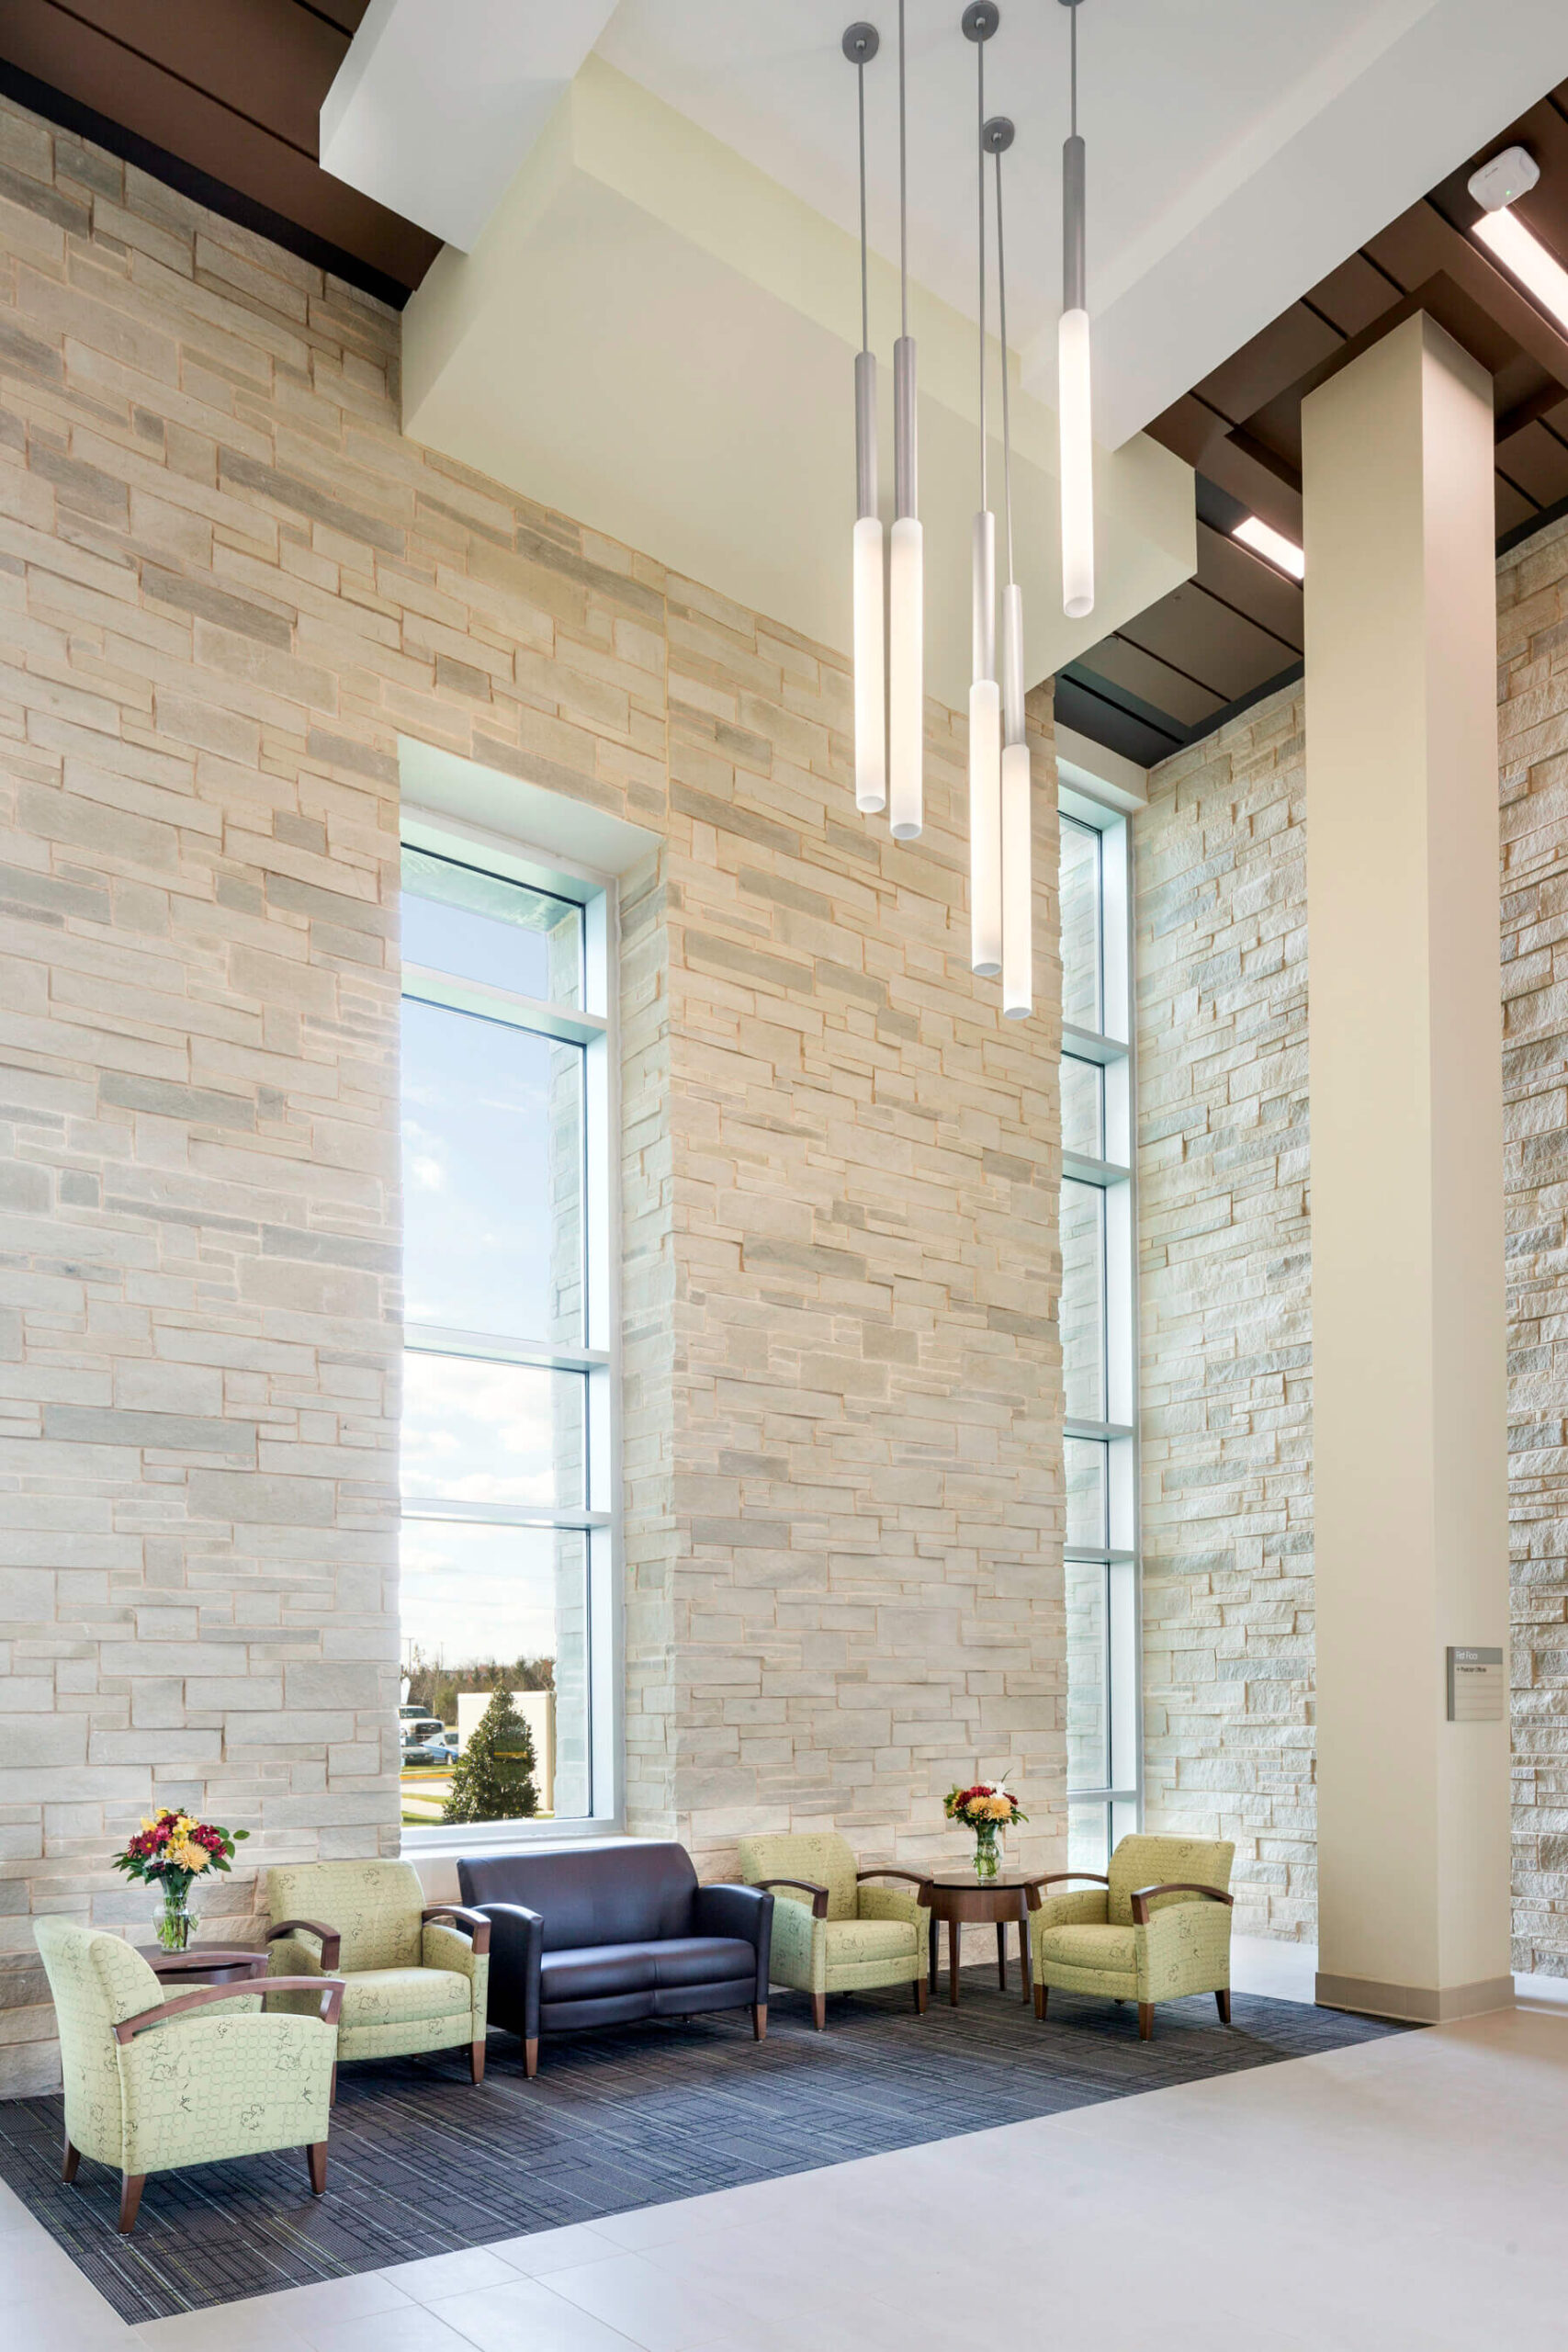 high ceiling with dramatic light fixture and stone walls in the lobby